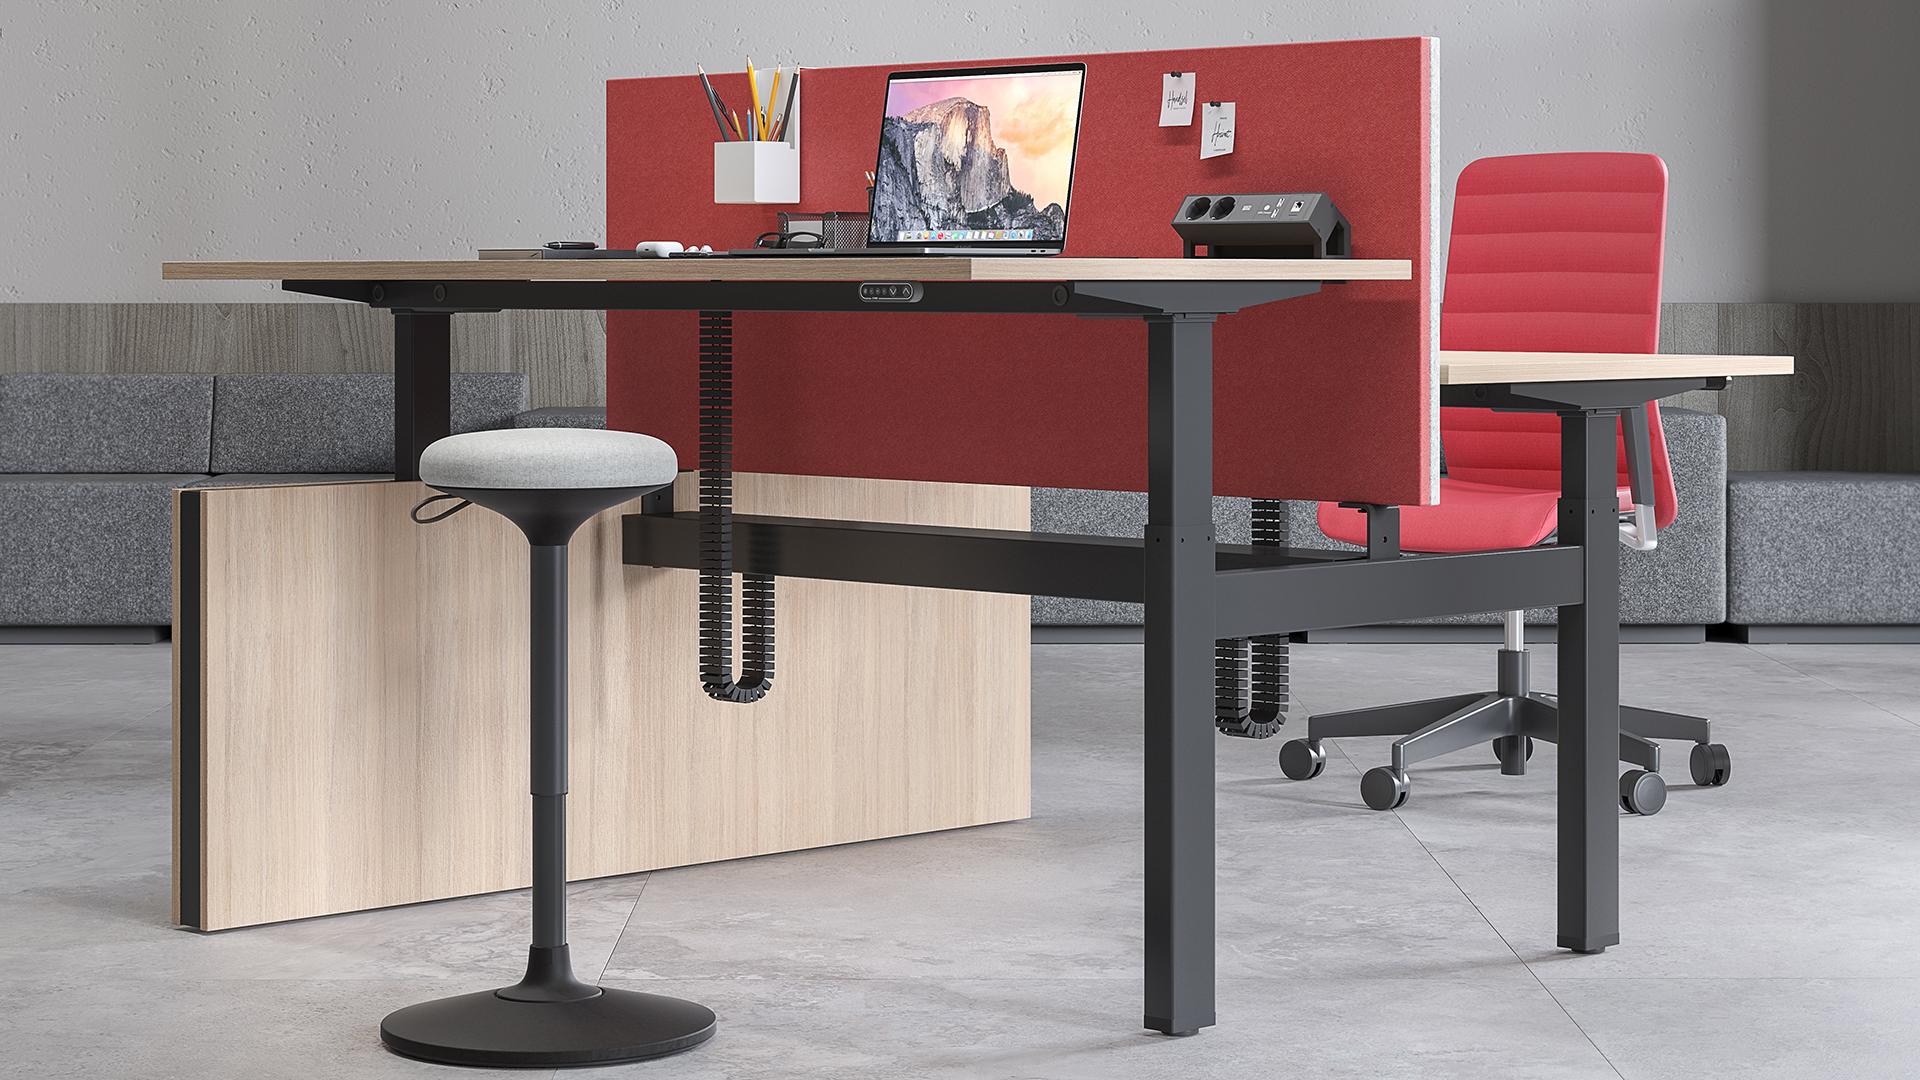 Modus acoustic desk divider in red and grey